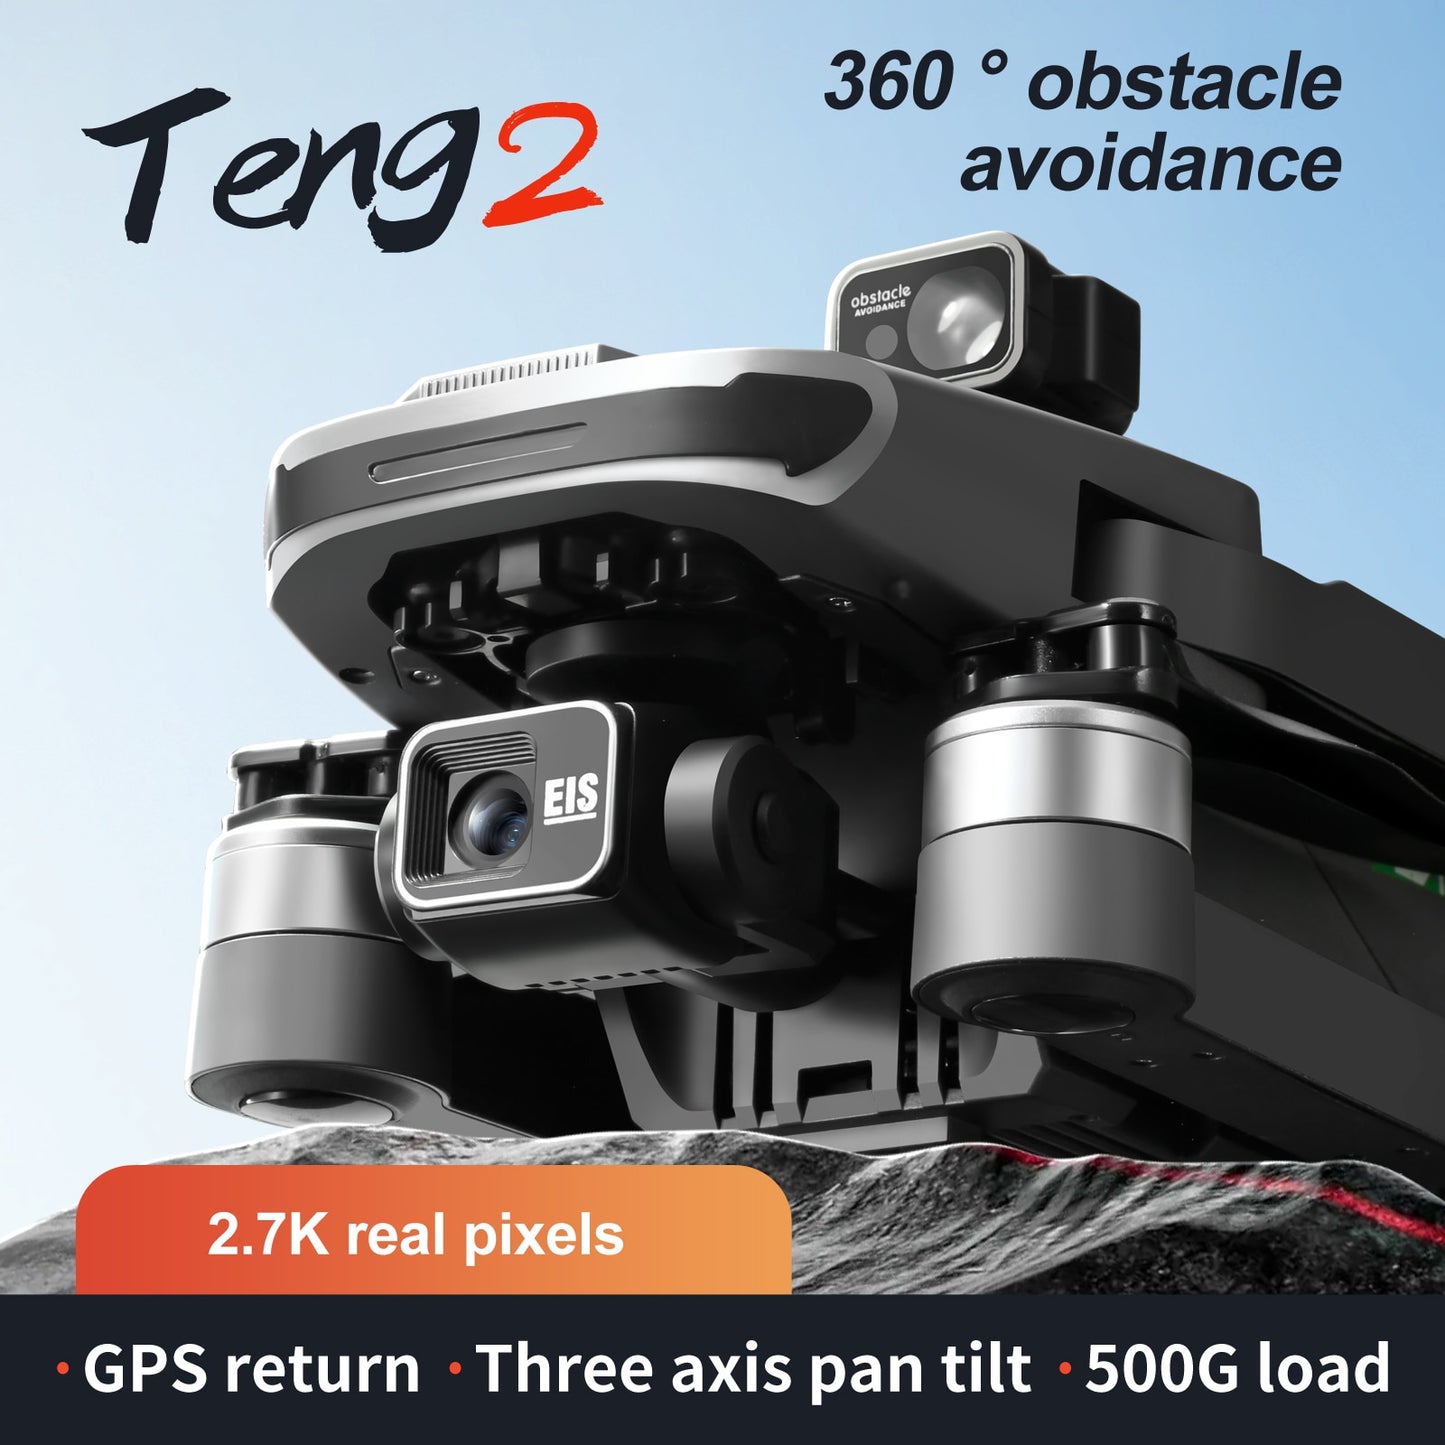 S155 Drone, 0 360 obstacle Teng2 avoidance 2.7K real pixels